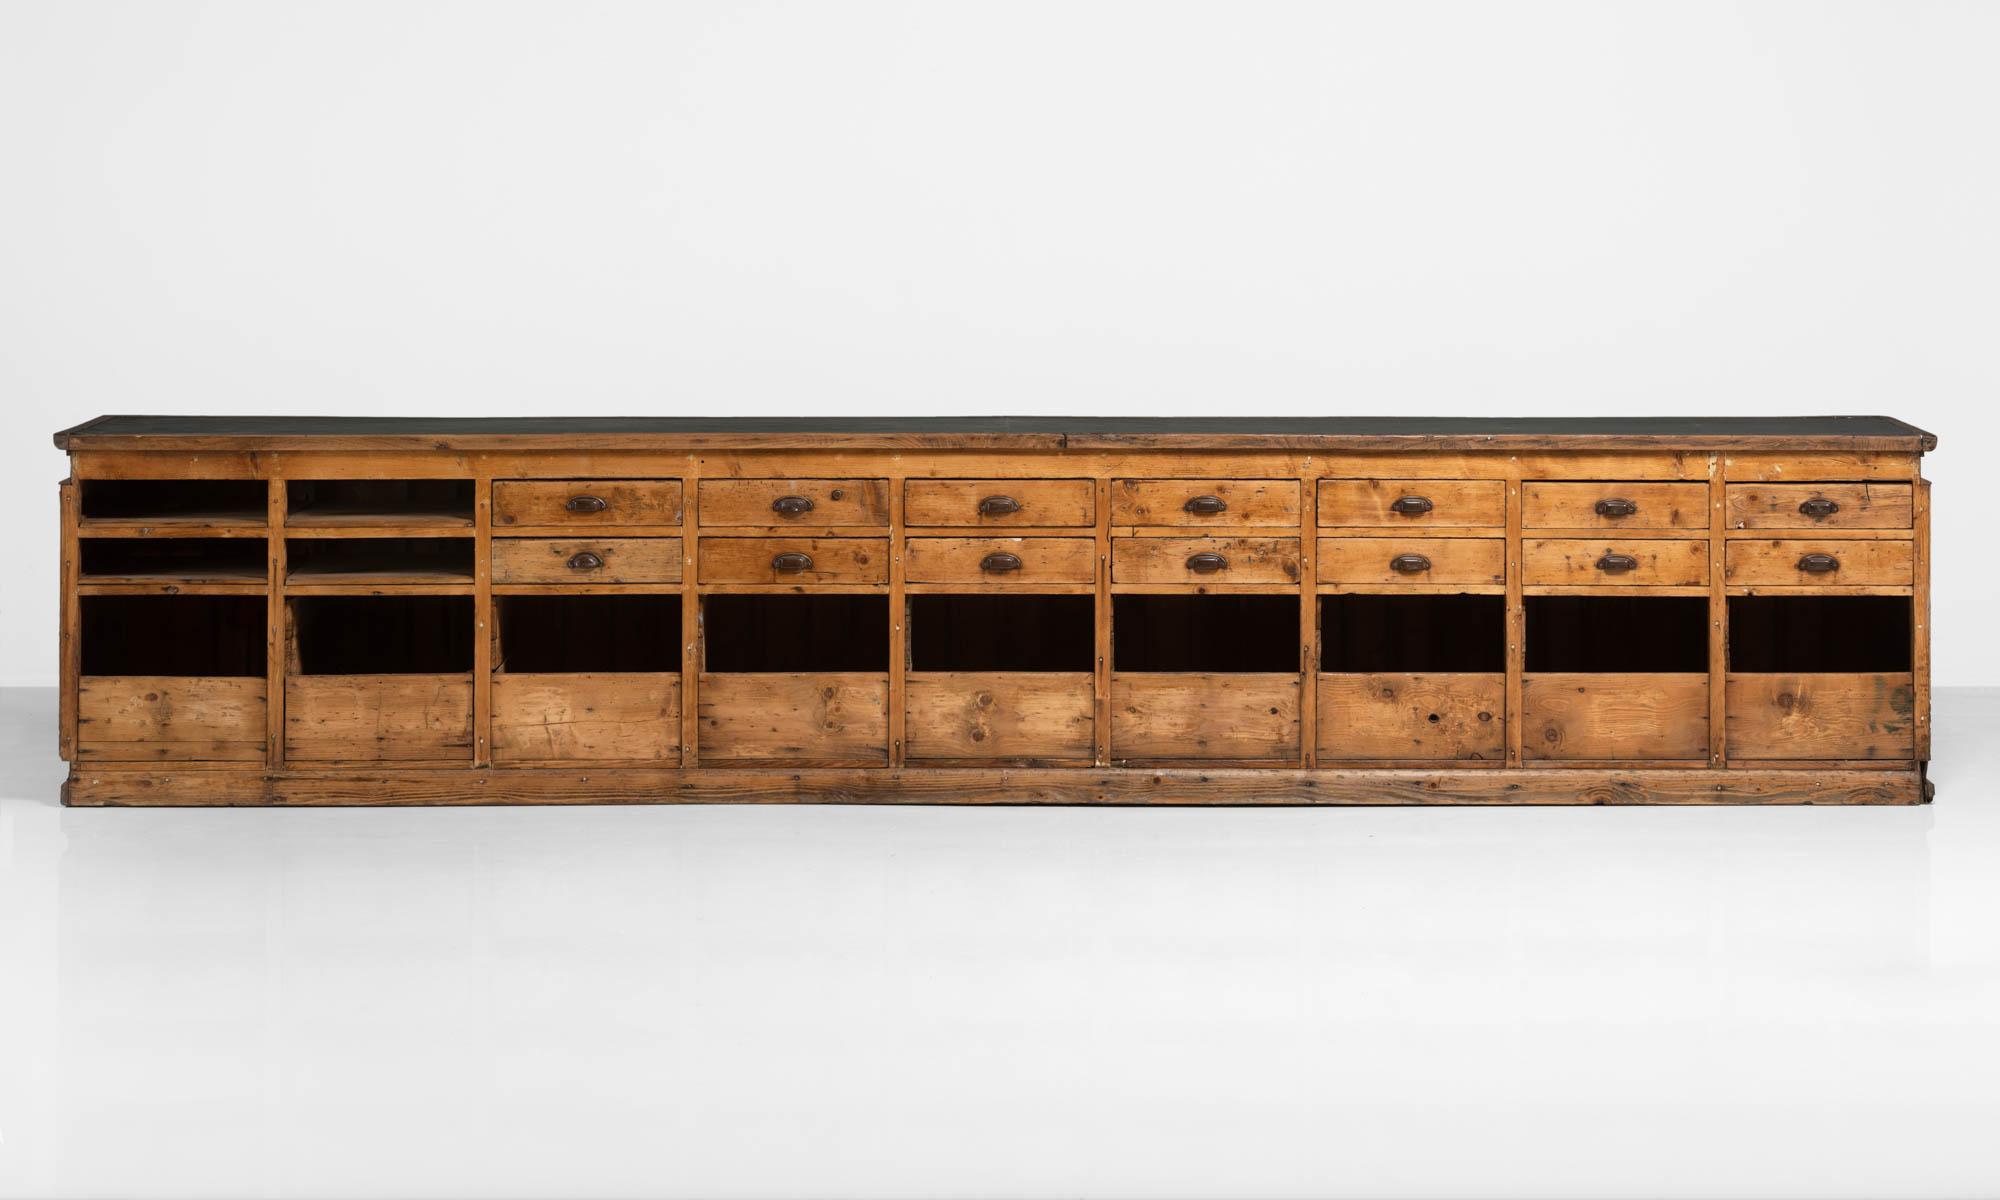 Massive pine chest of drawers, Italy, circa 1940.

Impressive storage unit with multiple drawers, bins and black mica top.